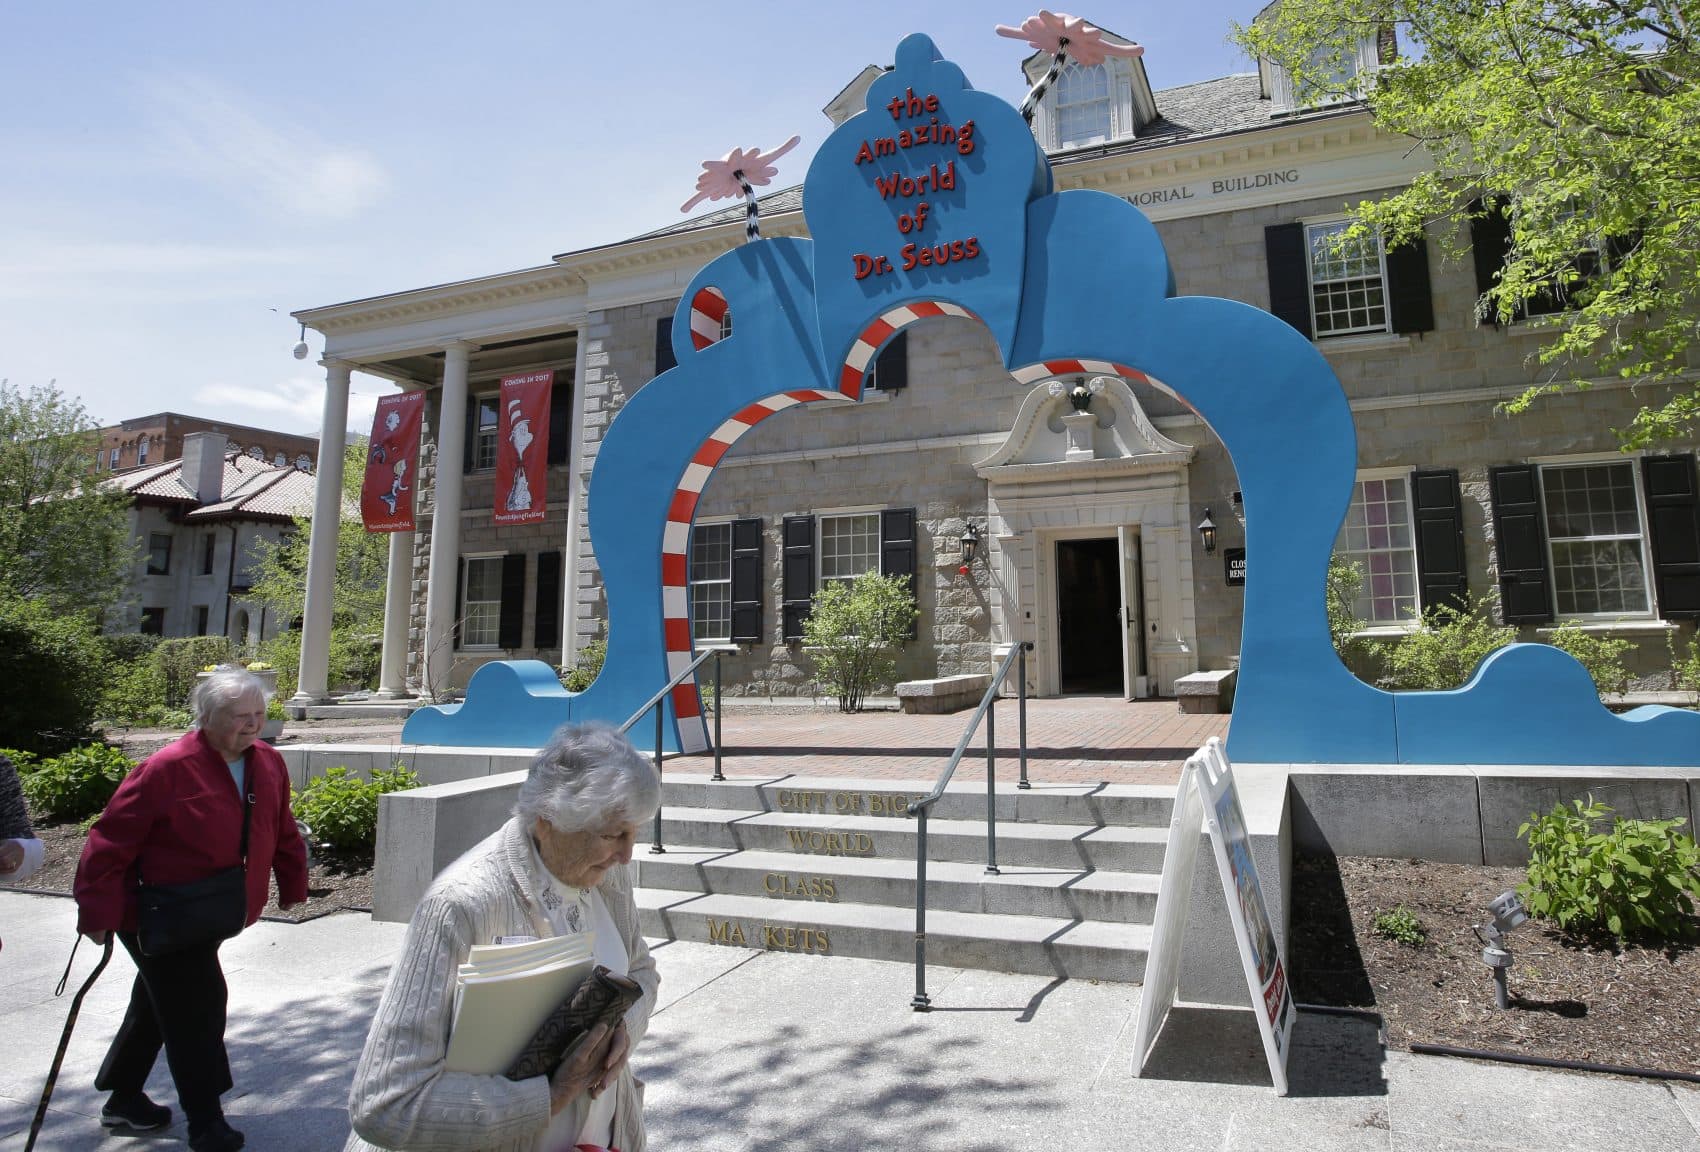 A Look Inside Springfield's New Dr. Seuss Museum The ARTery